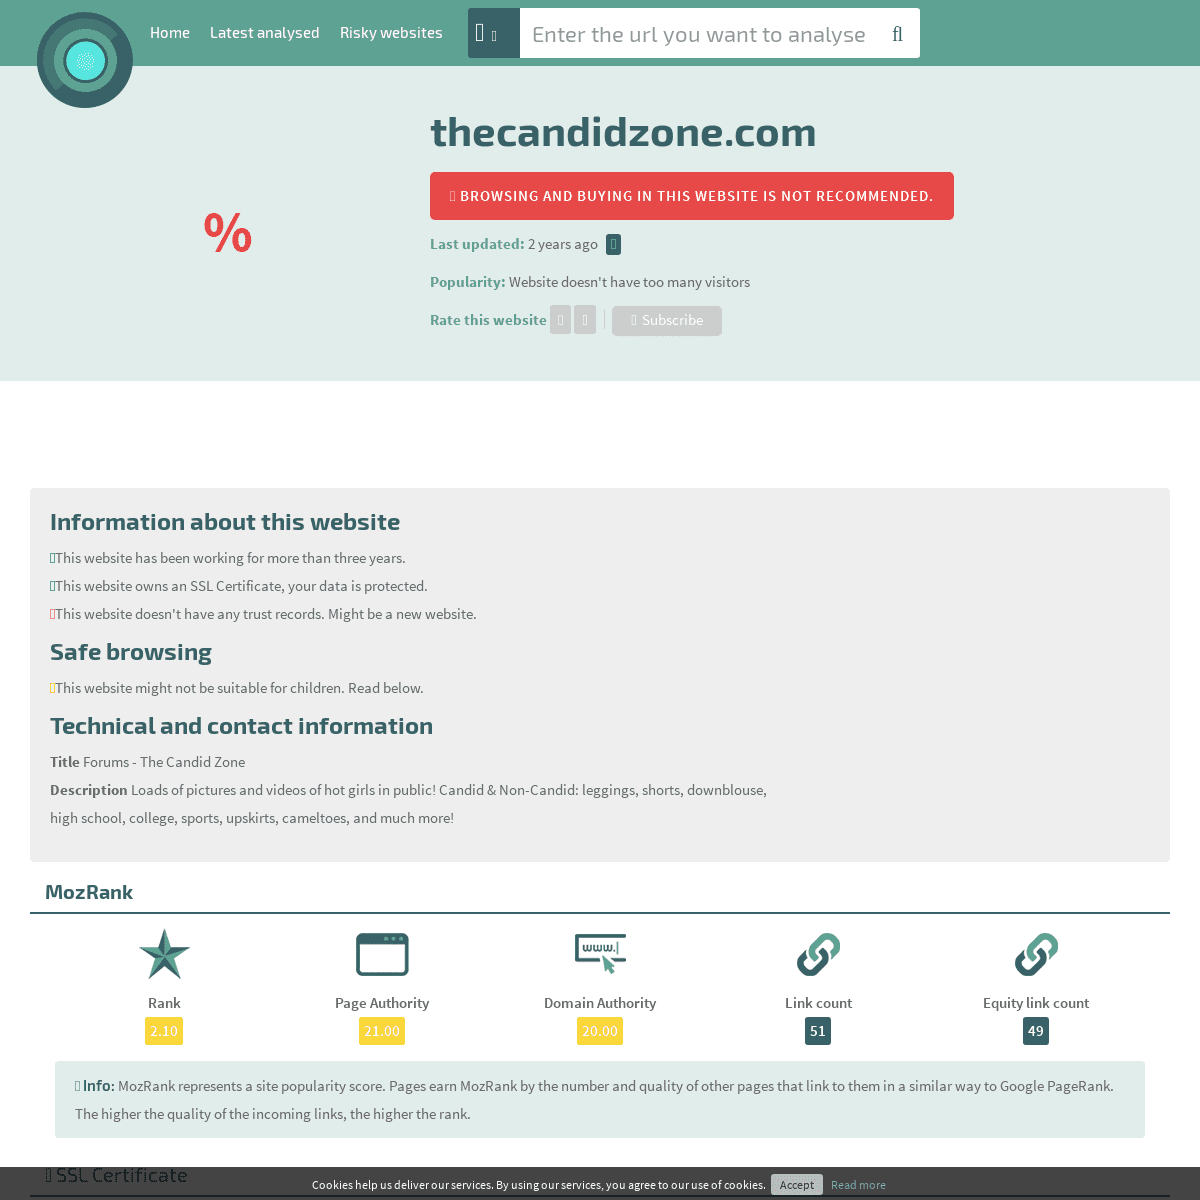 A complete backup of https://www.scamner.com/check/thecandidzone.com